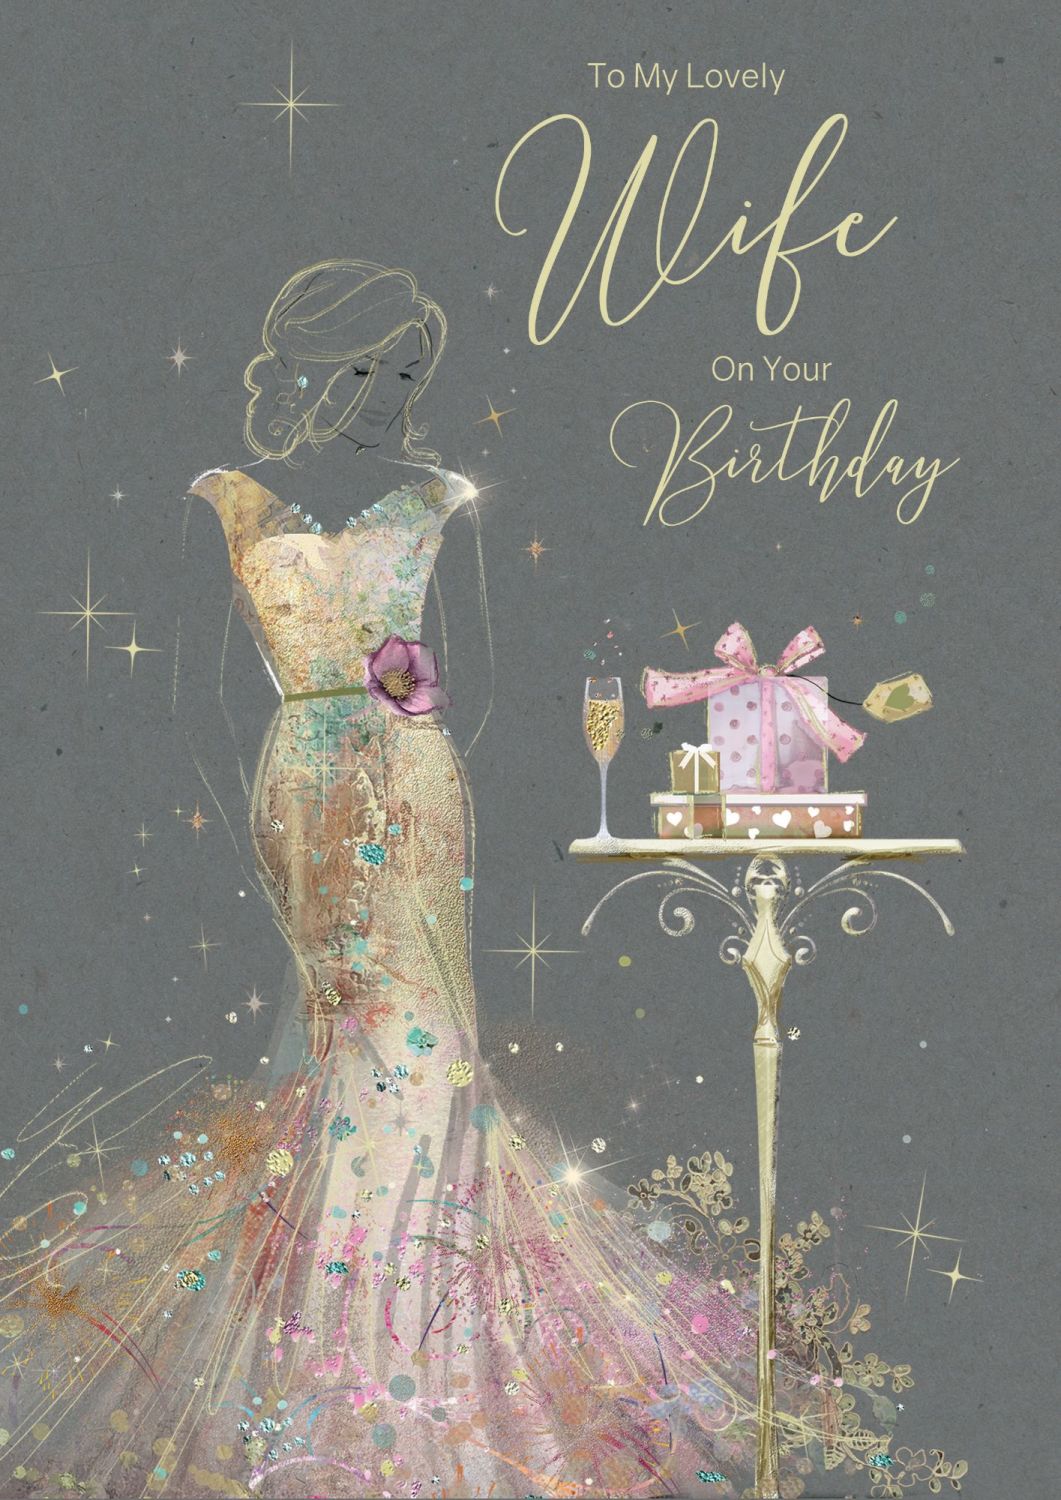 To My Lovely Wife On Your Birthday - UNIQUE Birthday CARDS - Pretty BIRTHDA